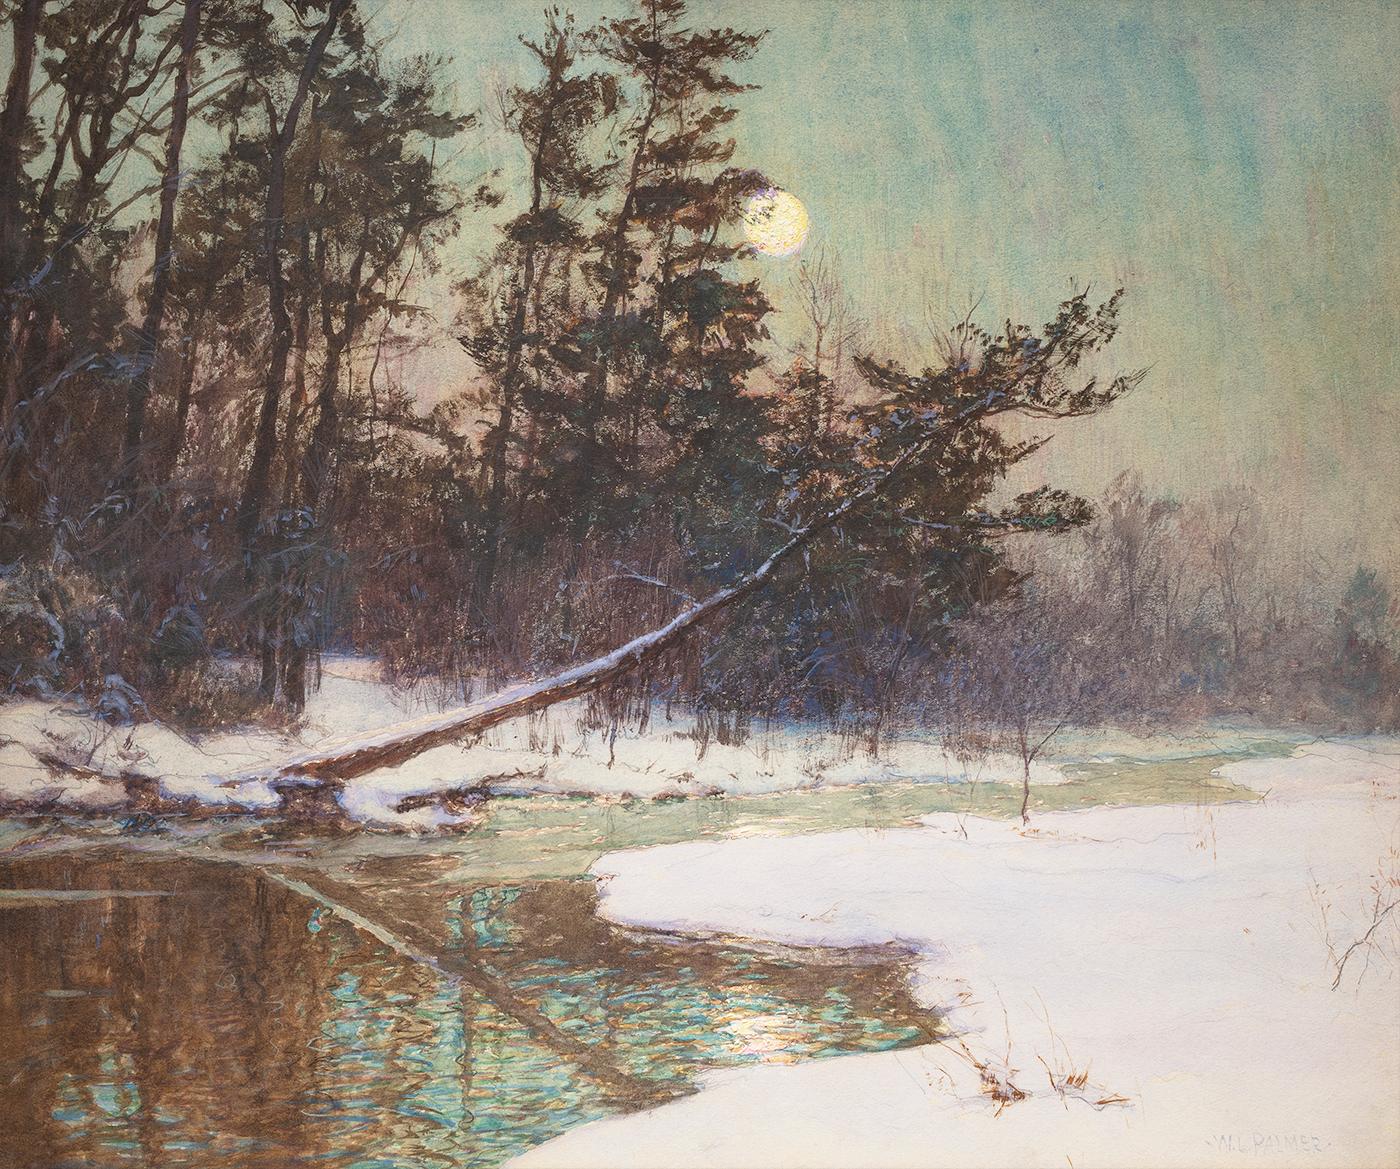 Moonrise Over a Snowy Landscape